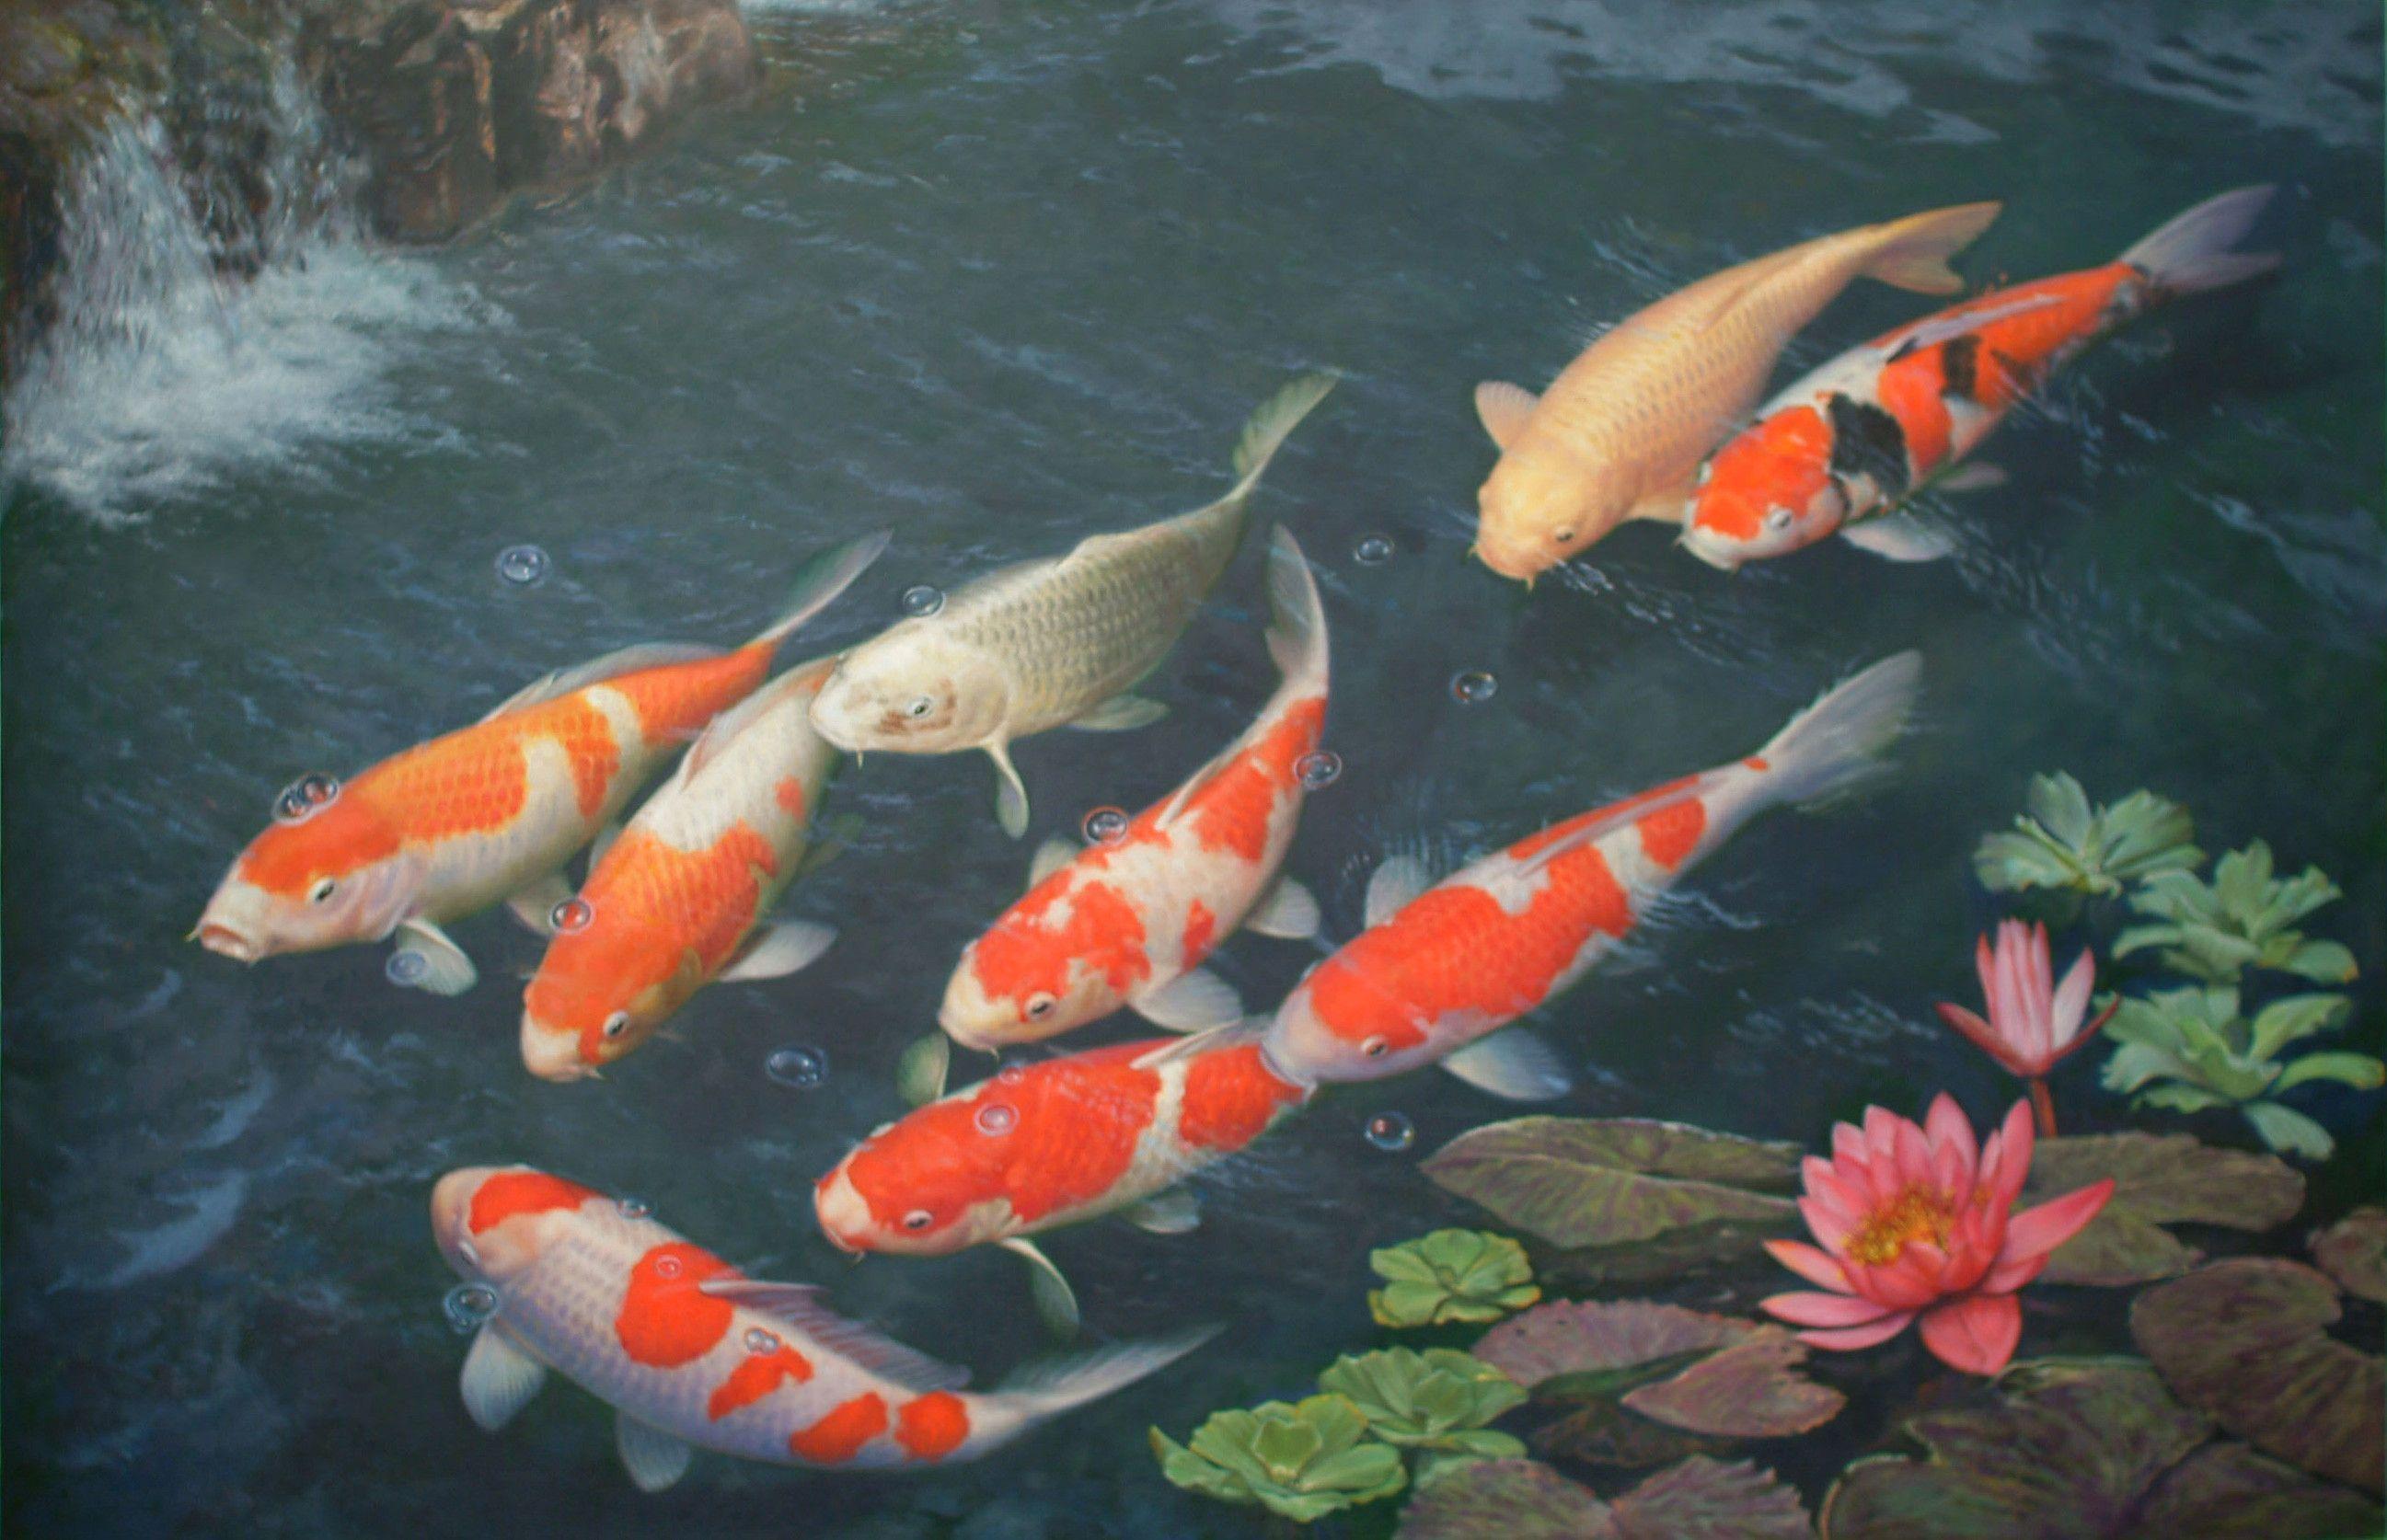 A pond with many koi fish swimming in it - Koi fish